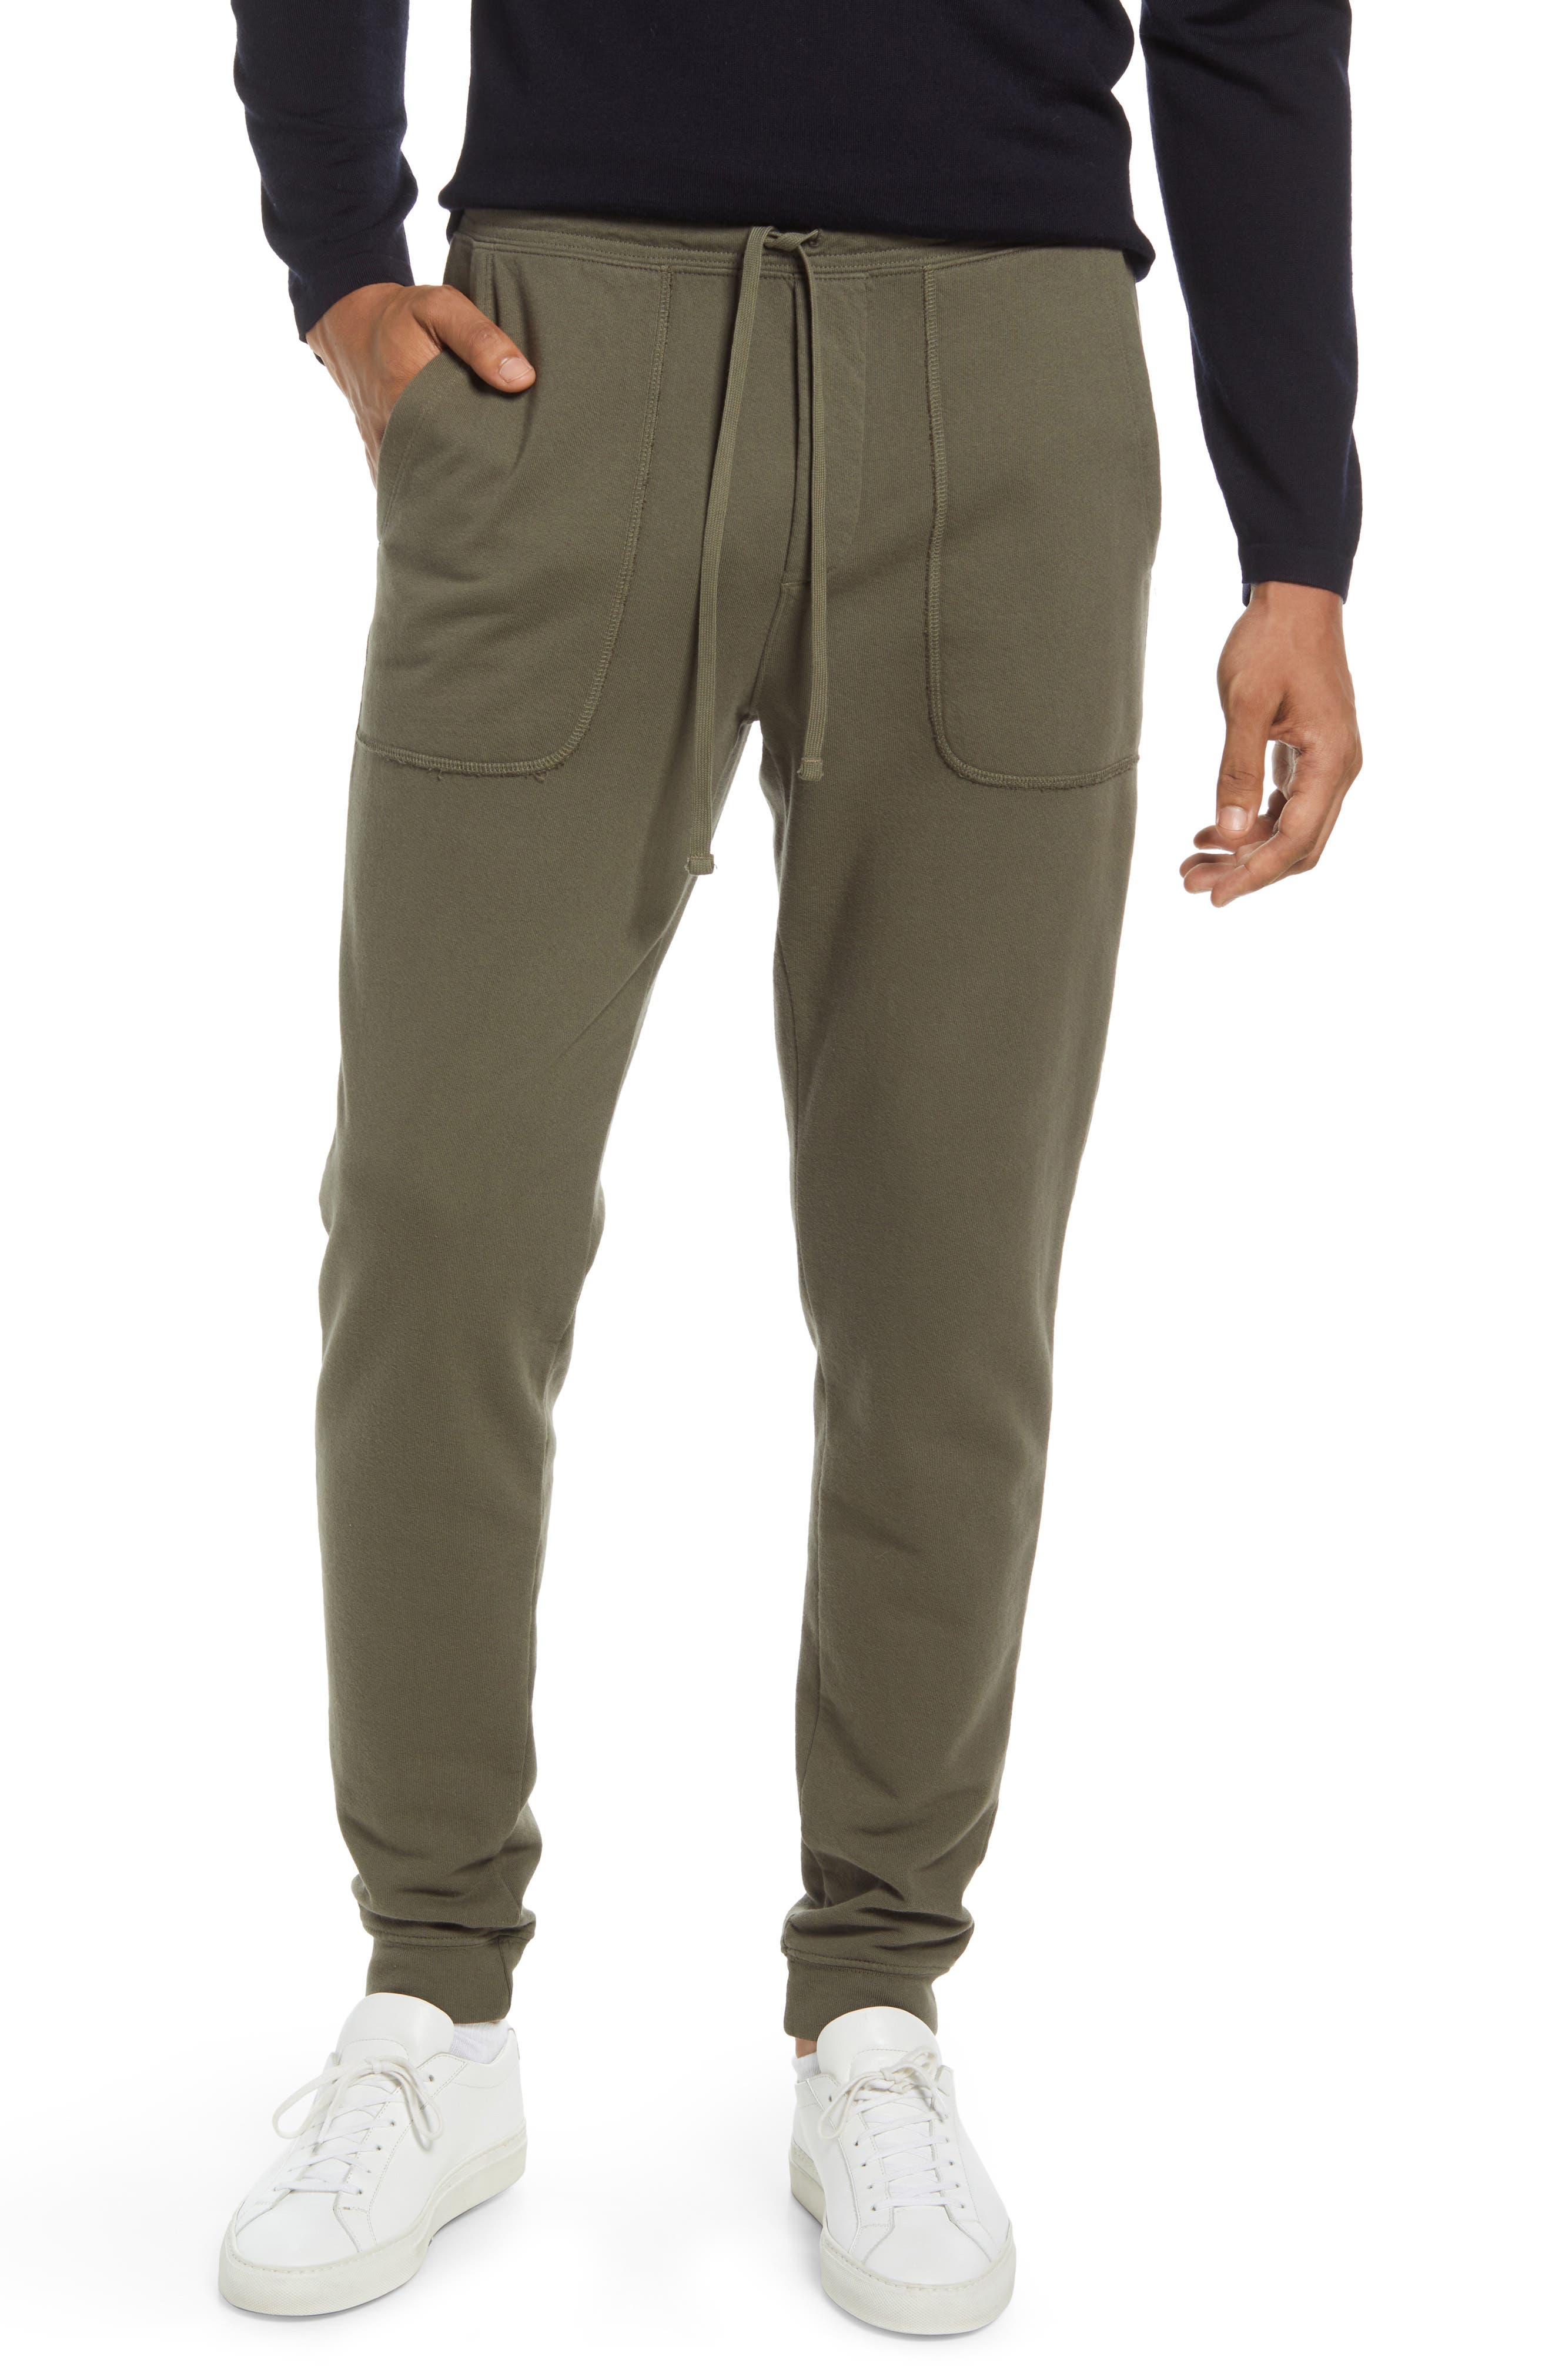 Vince Garment Dyed Cotton Joggers in Washed Buckeye Olive at Nordstrom